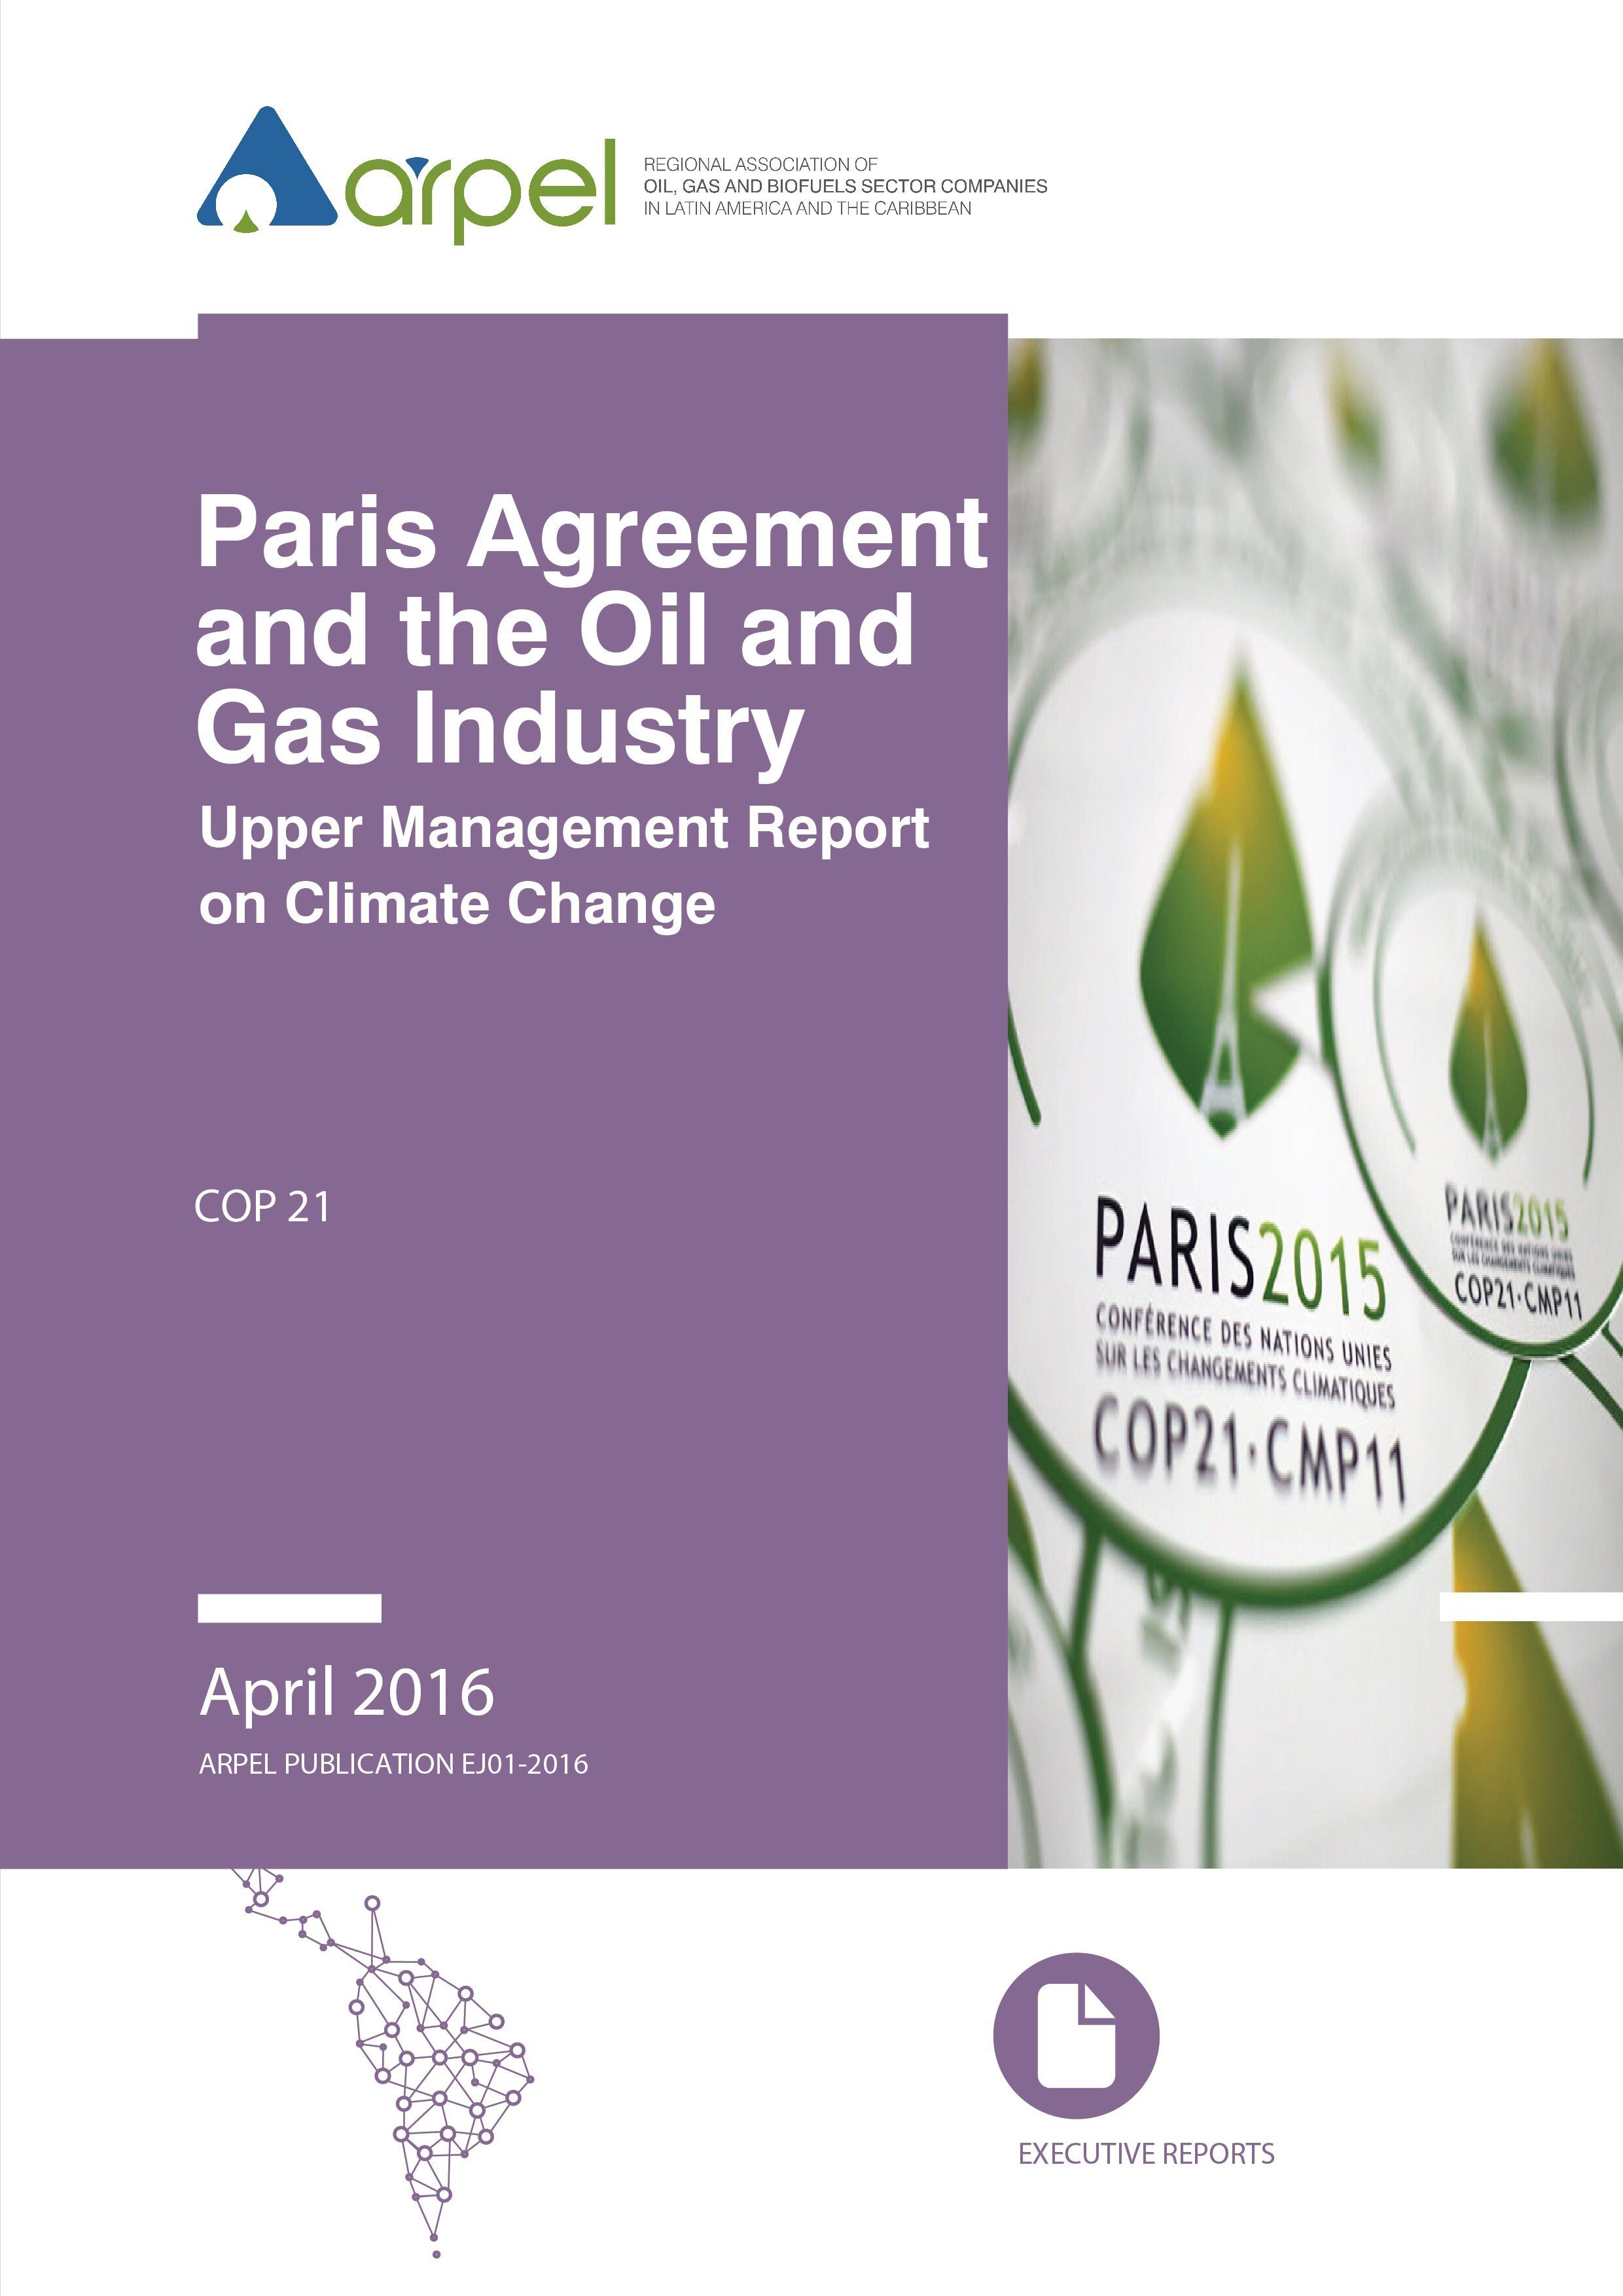 Paris Agreement and the oil and gas industry